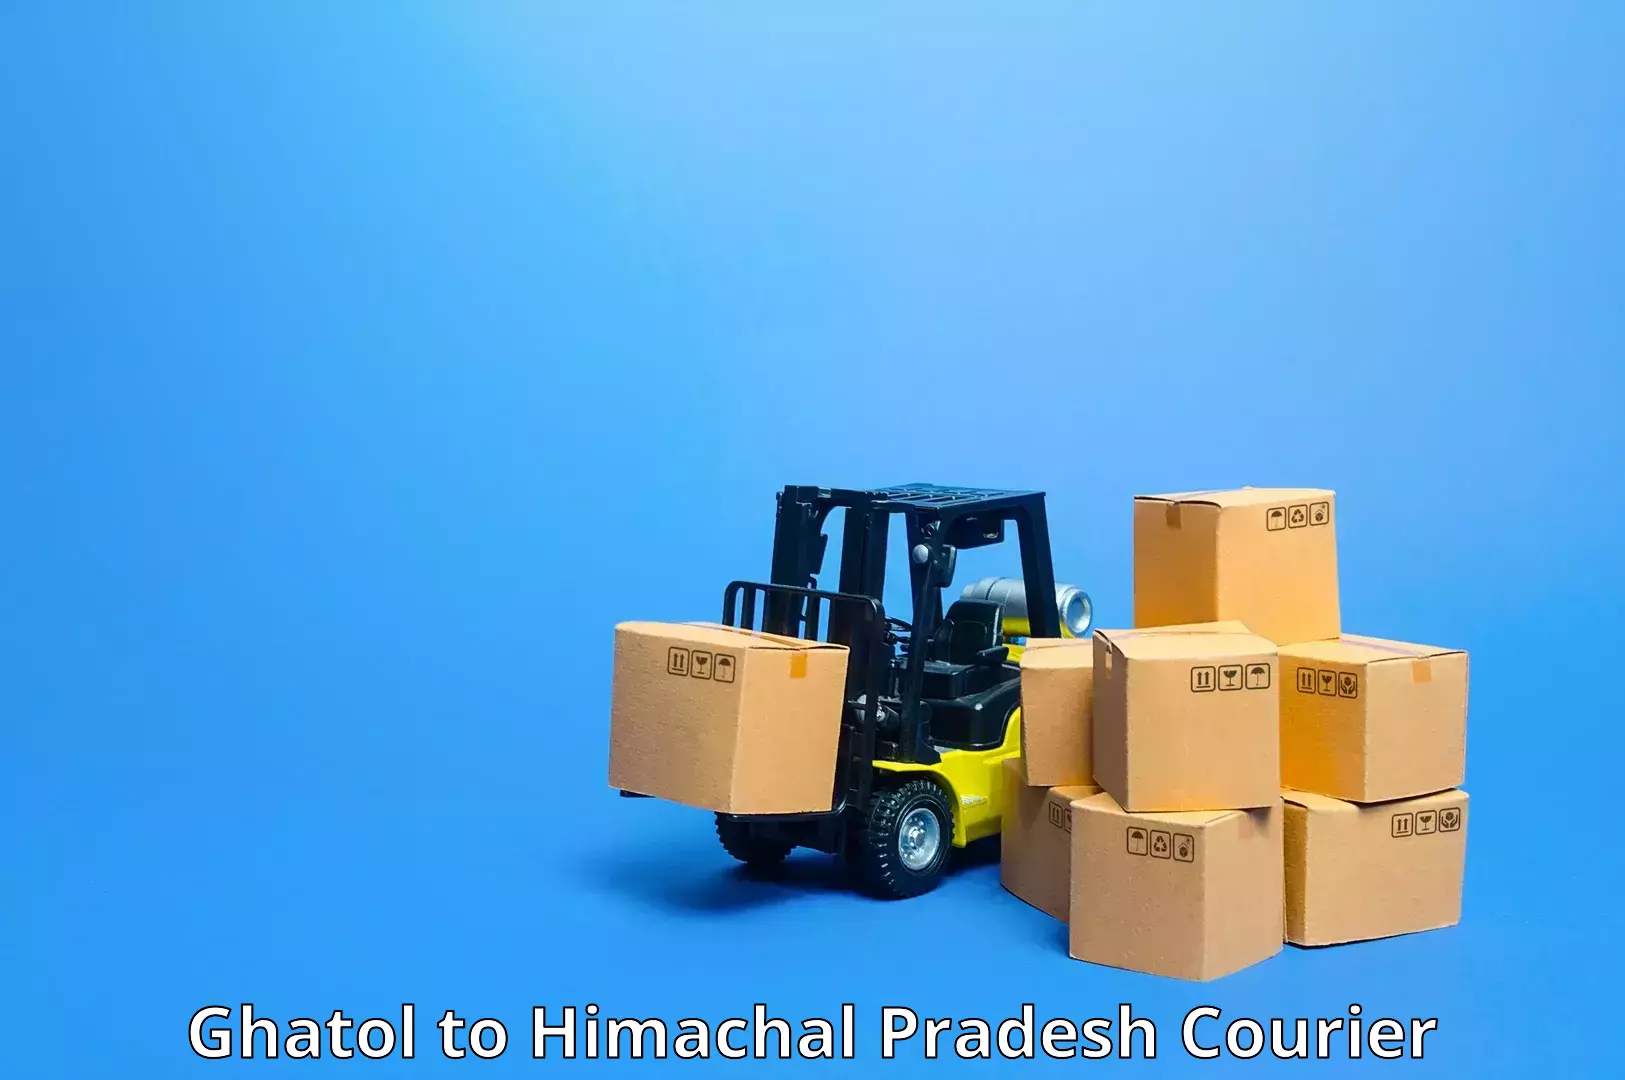 High-capacity courier solutions Ghatol to Bilaspur Himachal Pradesh